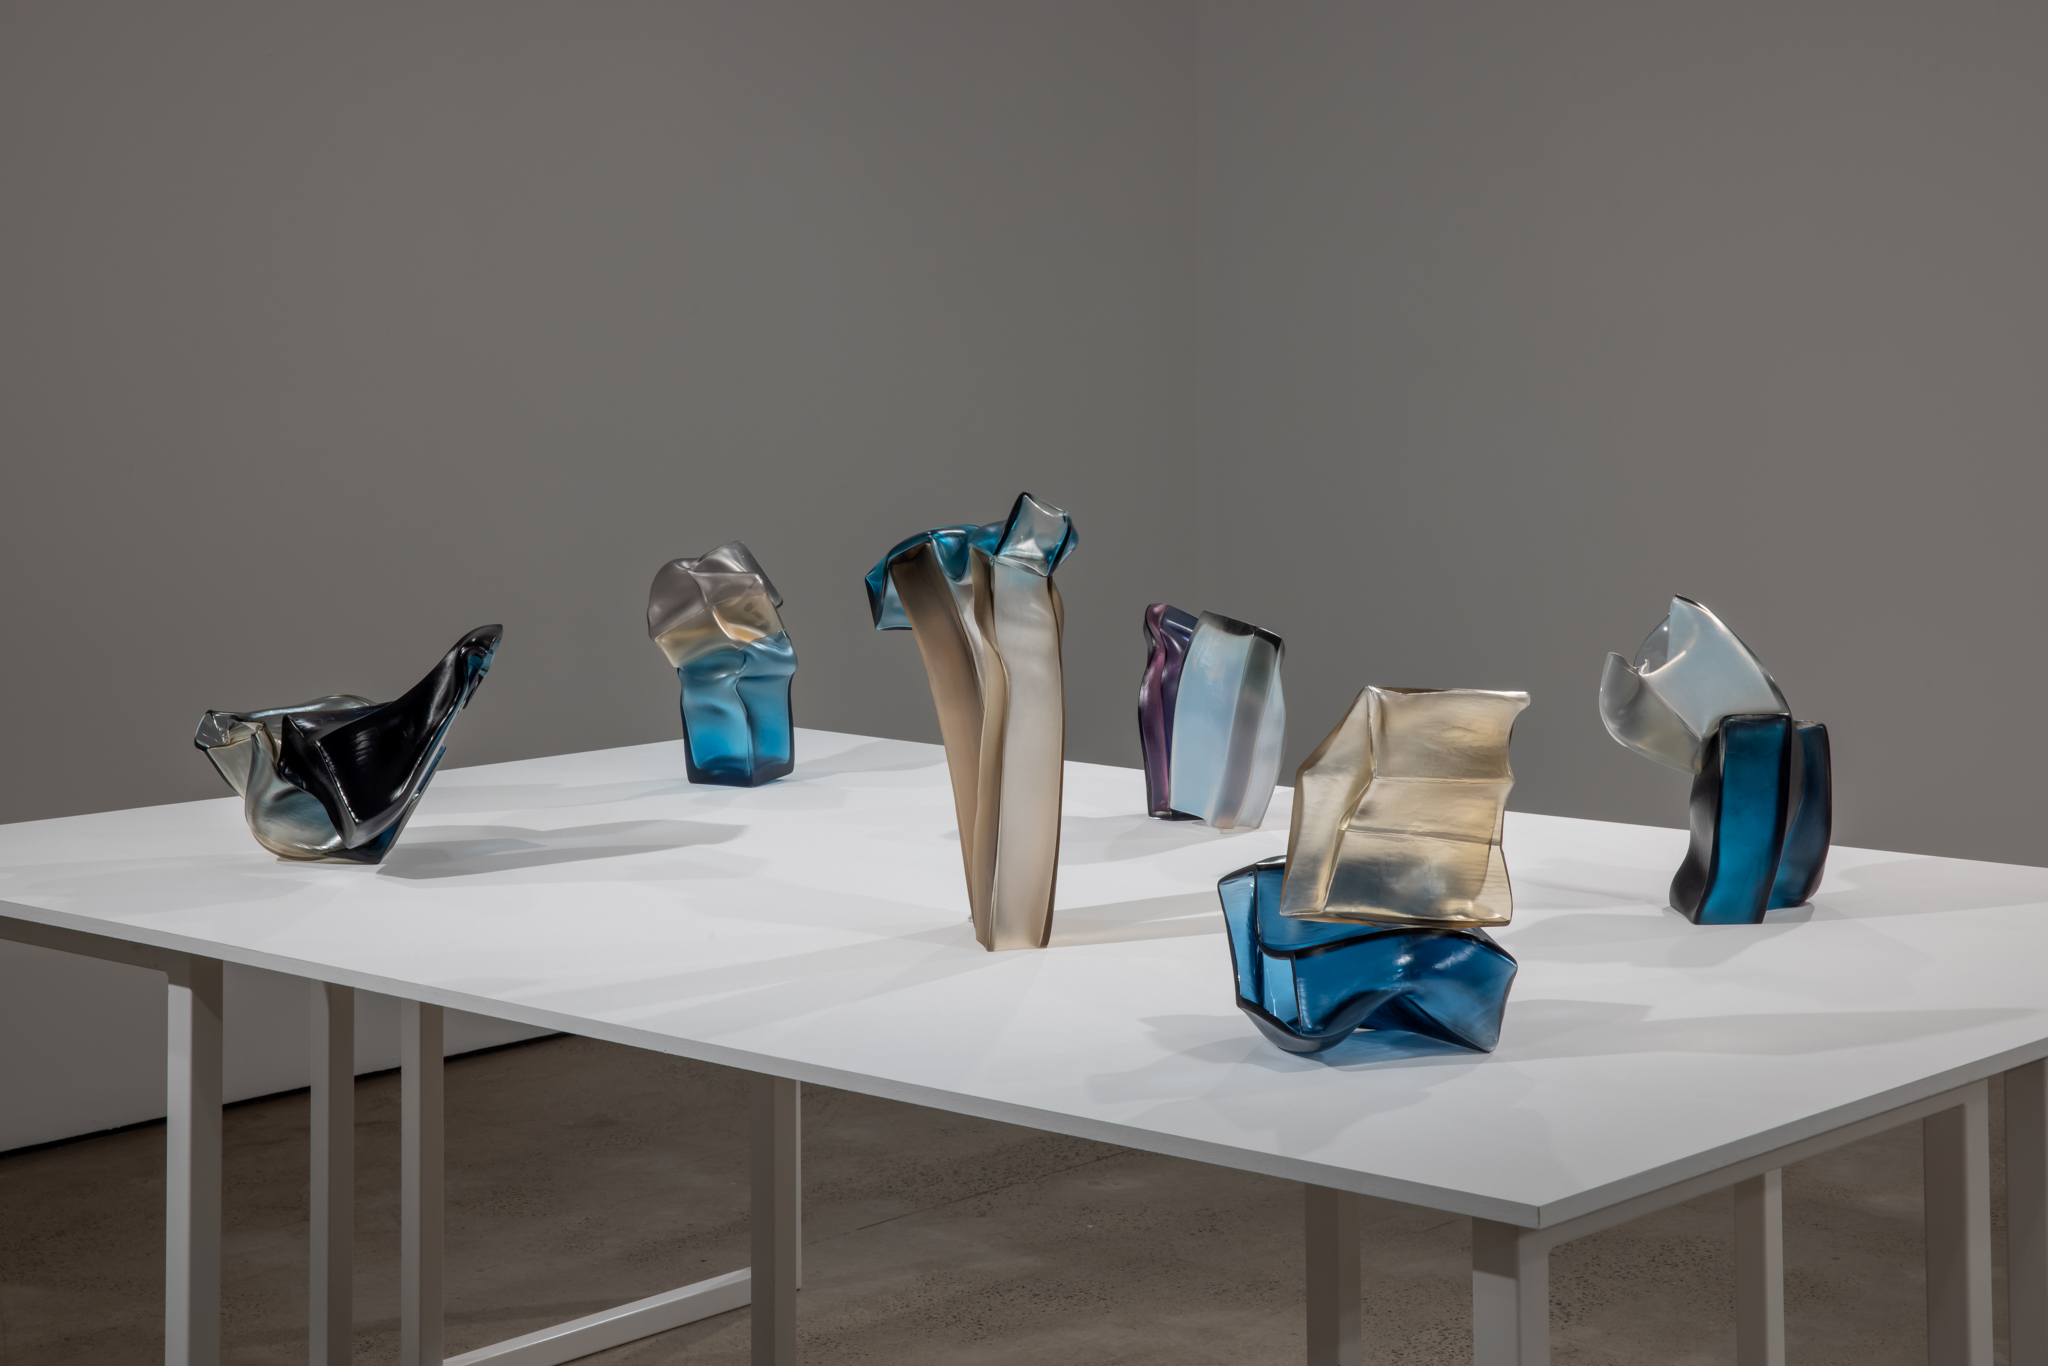 unswgalleries_glass_181022_credit_jacquiemanning-17.jpg